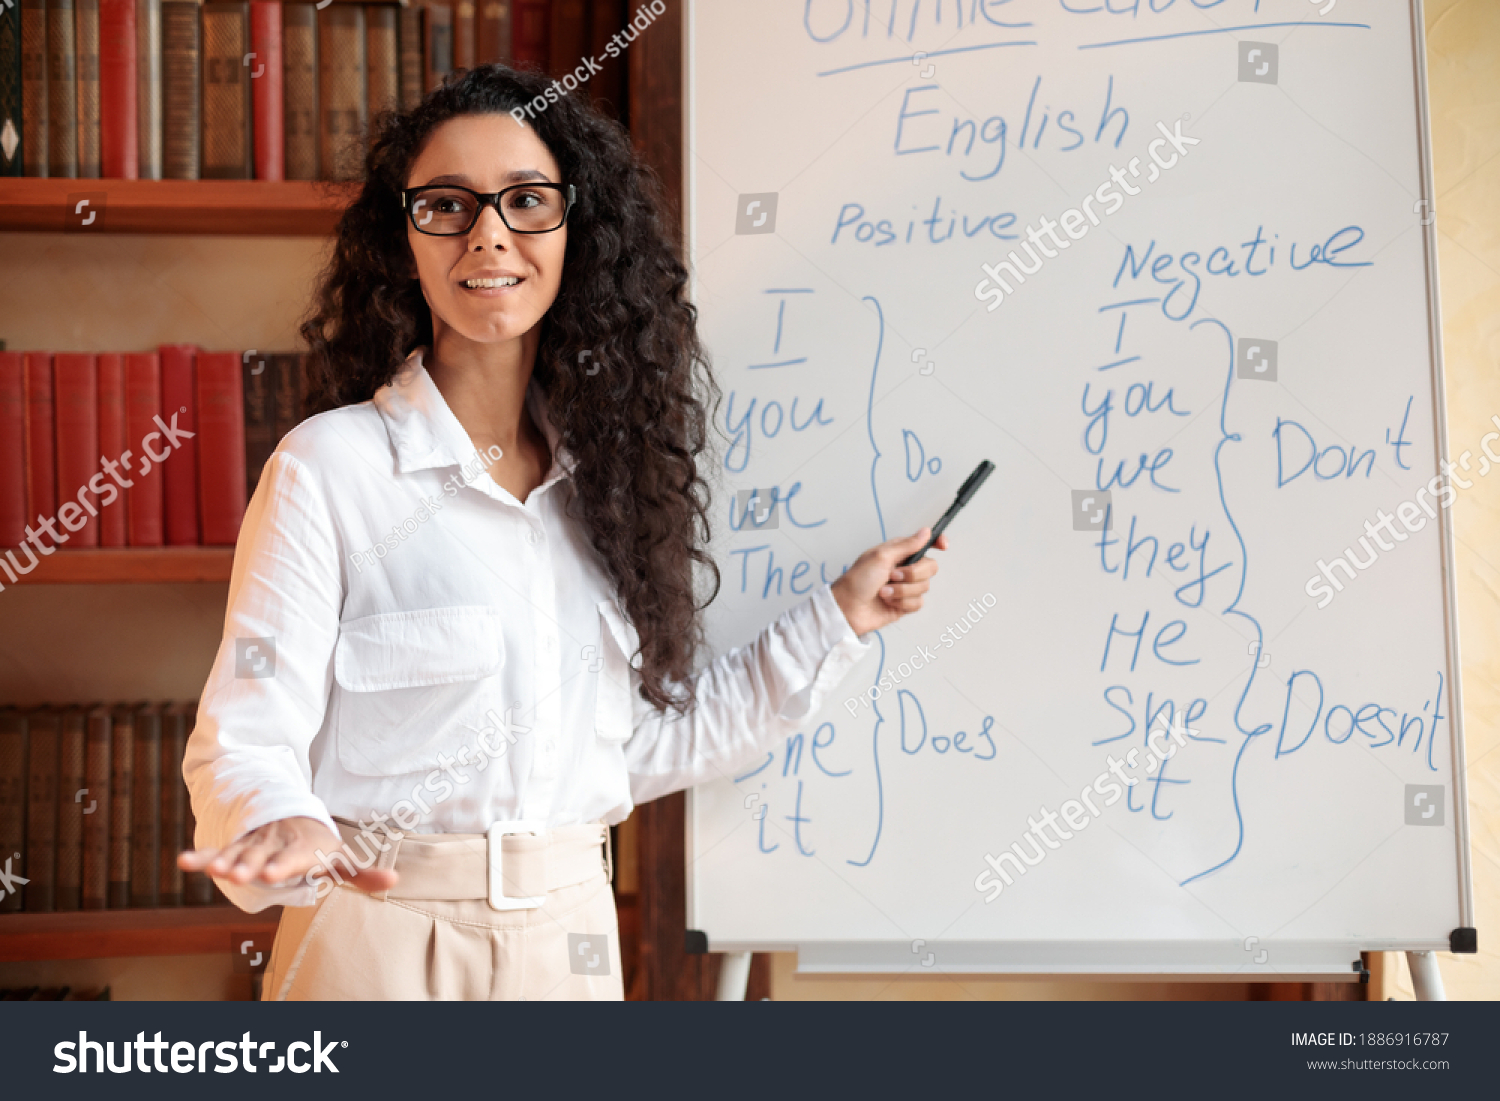 Foreign Language. Portrait of confident smiling young female lecturer wearing glasses teaching English pointing at grammar rules on board with marker, looking back at students at classroom #1886916787